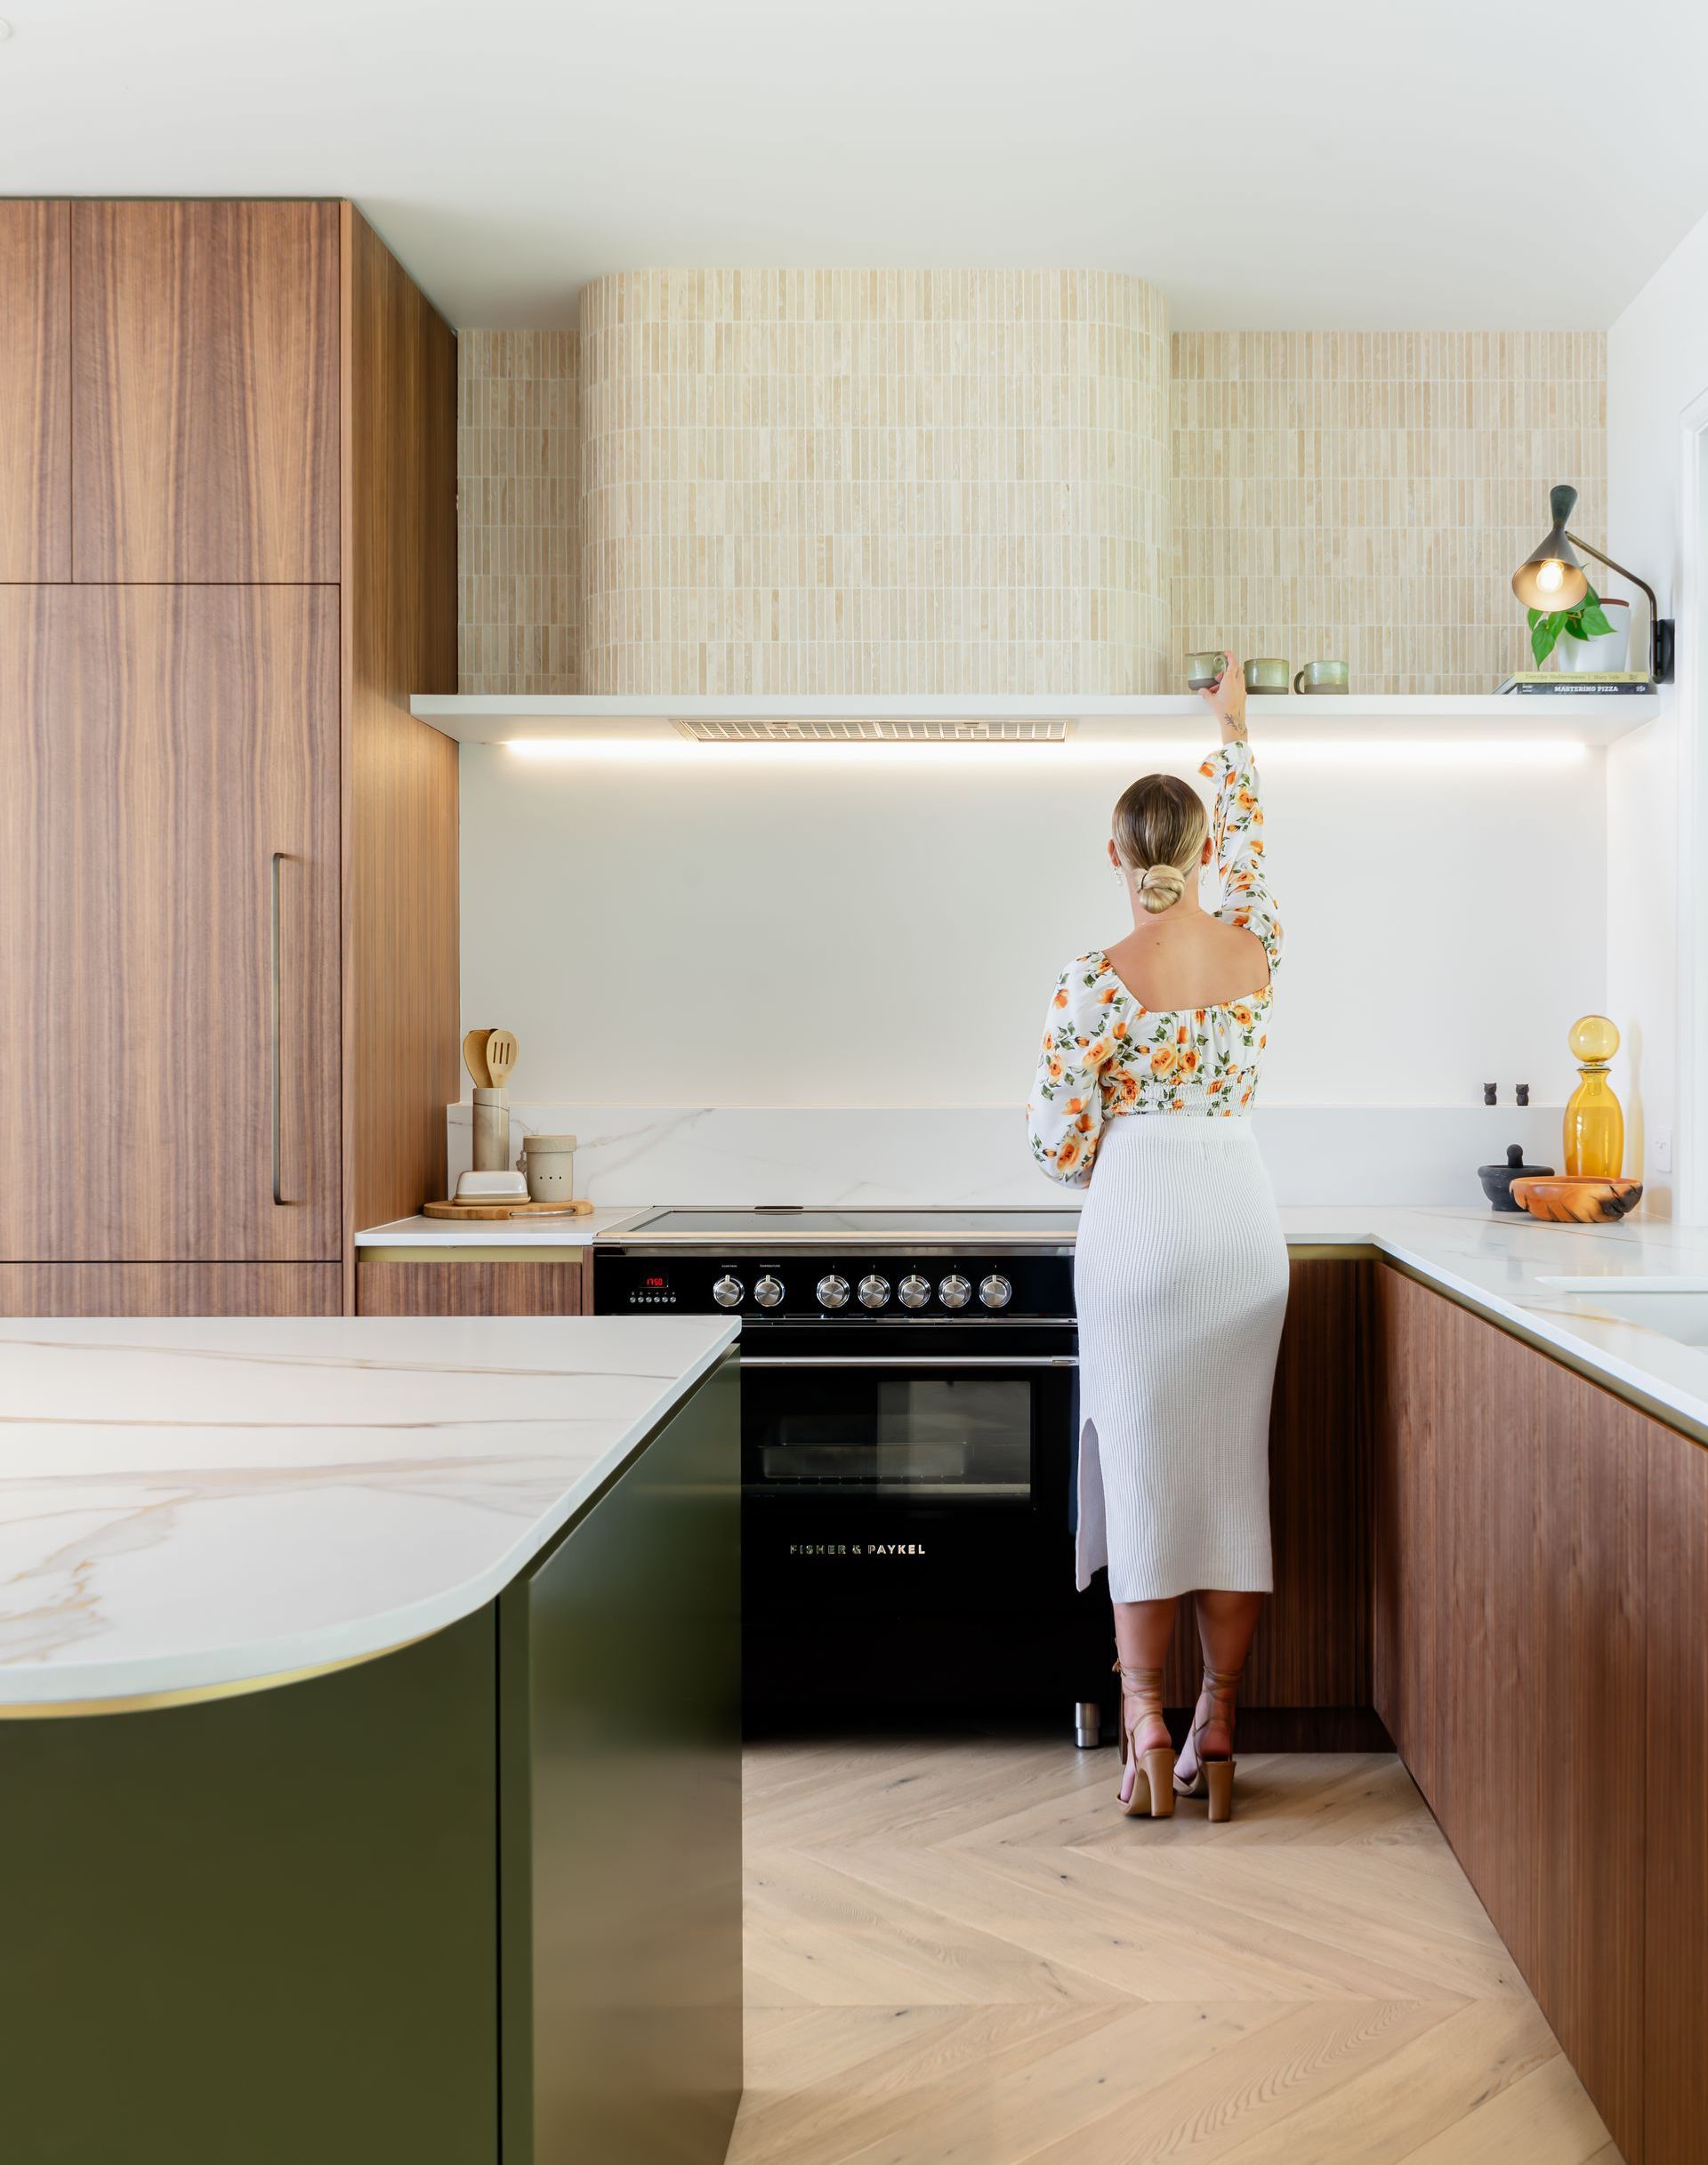 One of the best kitchens in Newcastle is this Mid-Century Modern Kitchen recently completed by our team.